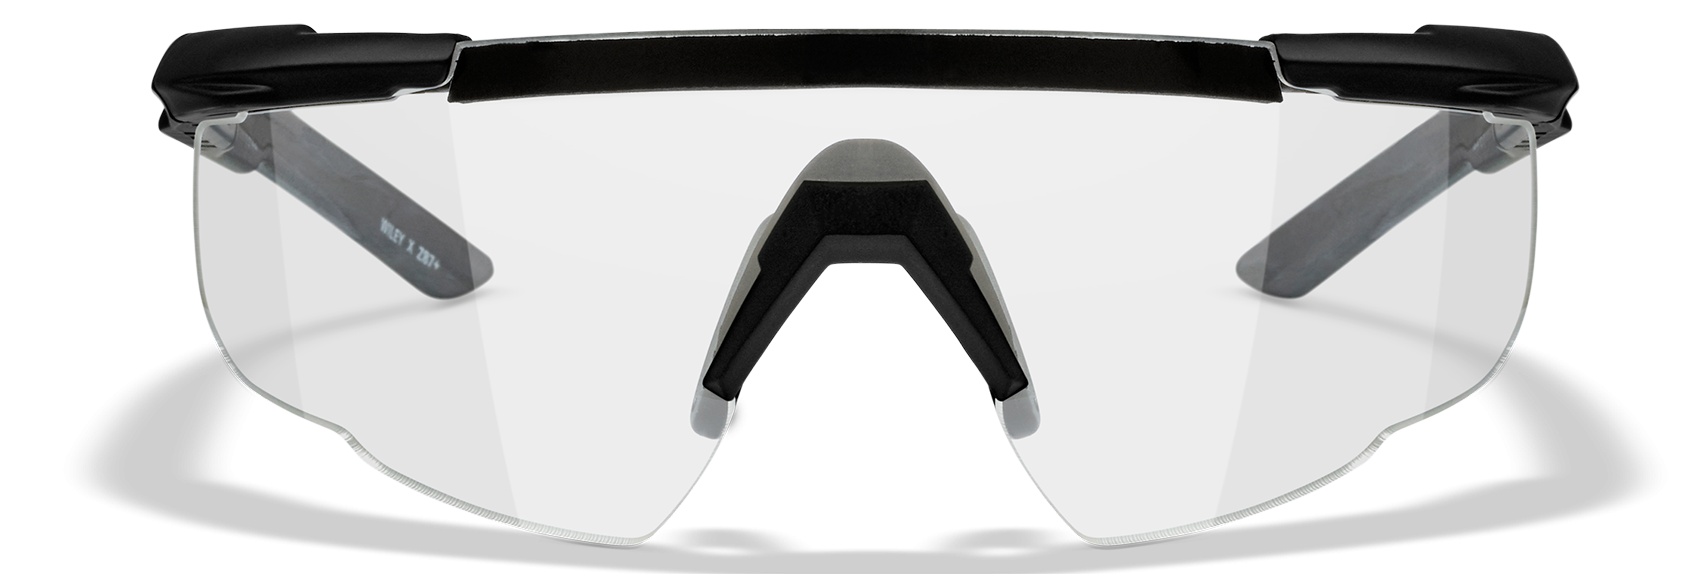 Wiley X Saber Advanced Clear Polycarbonate Sunglasses